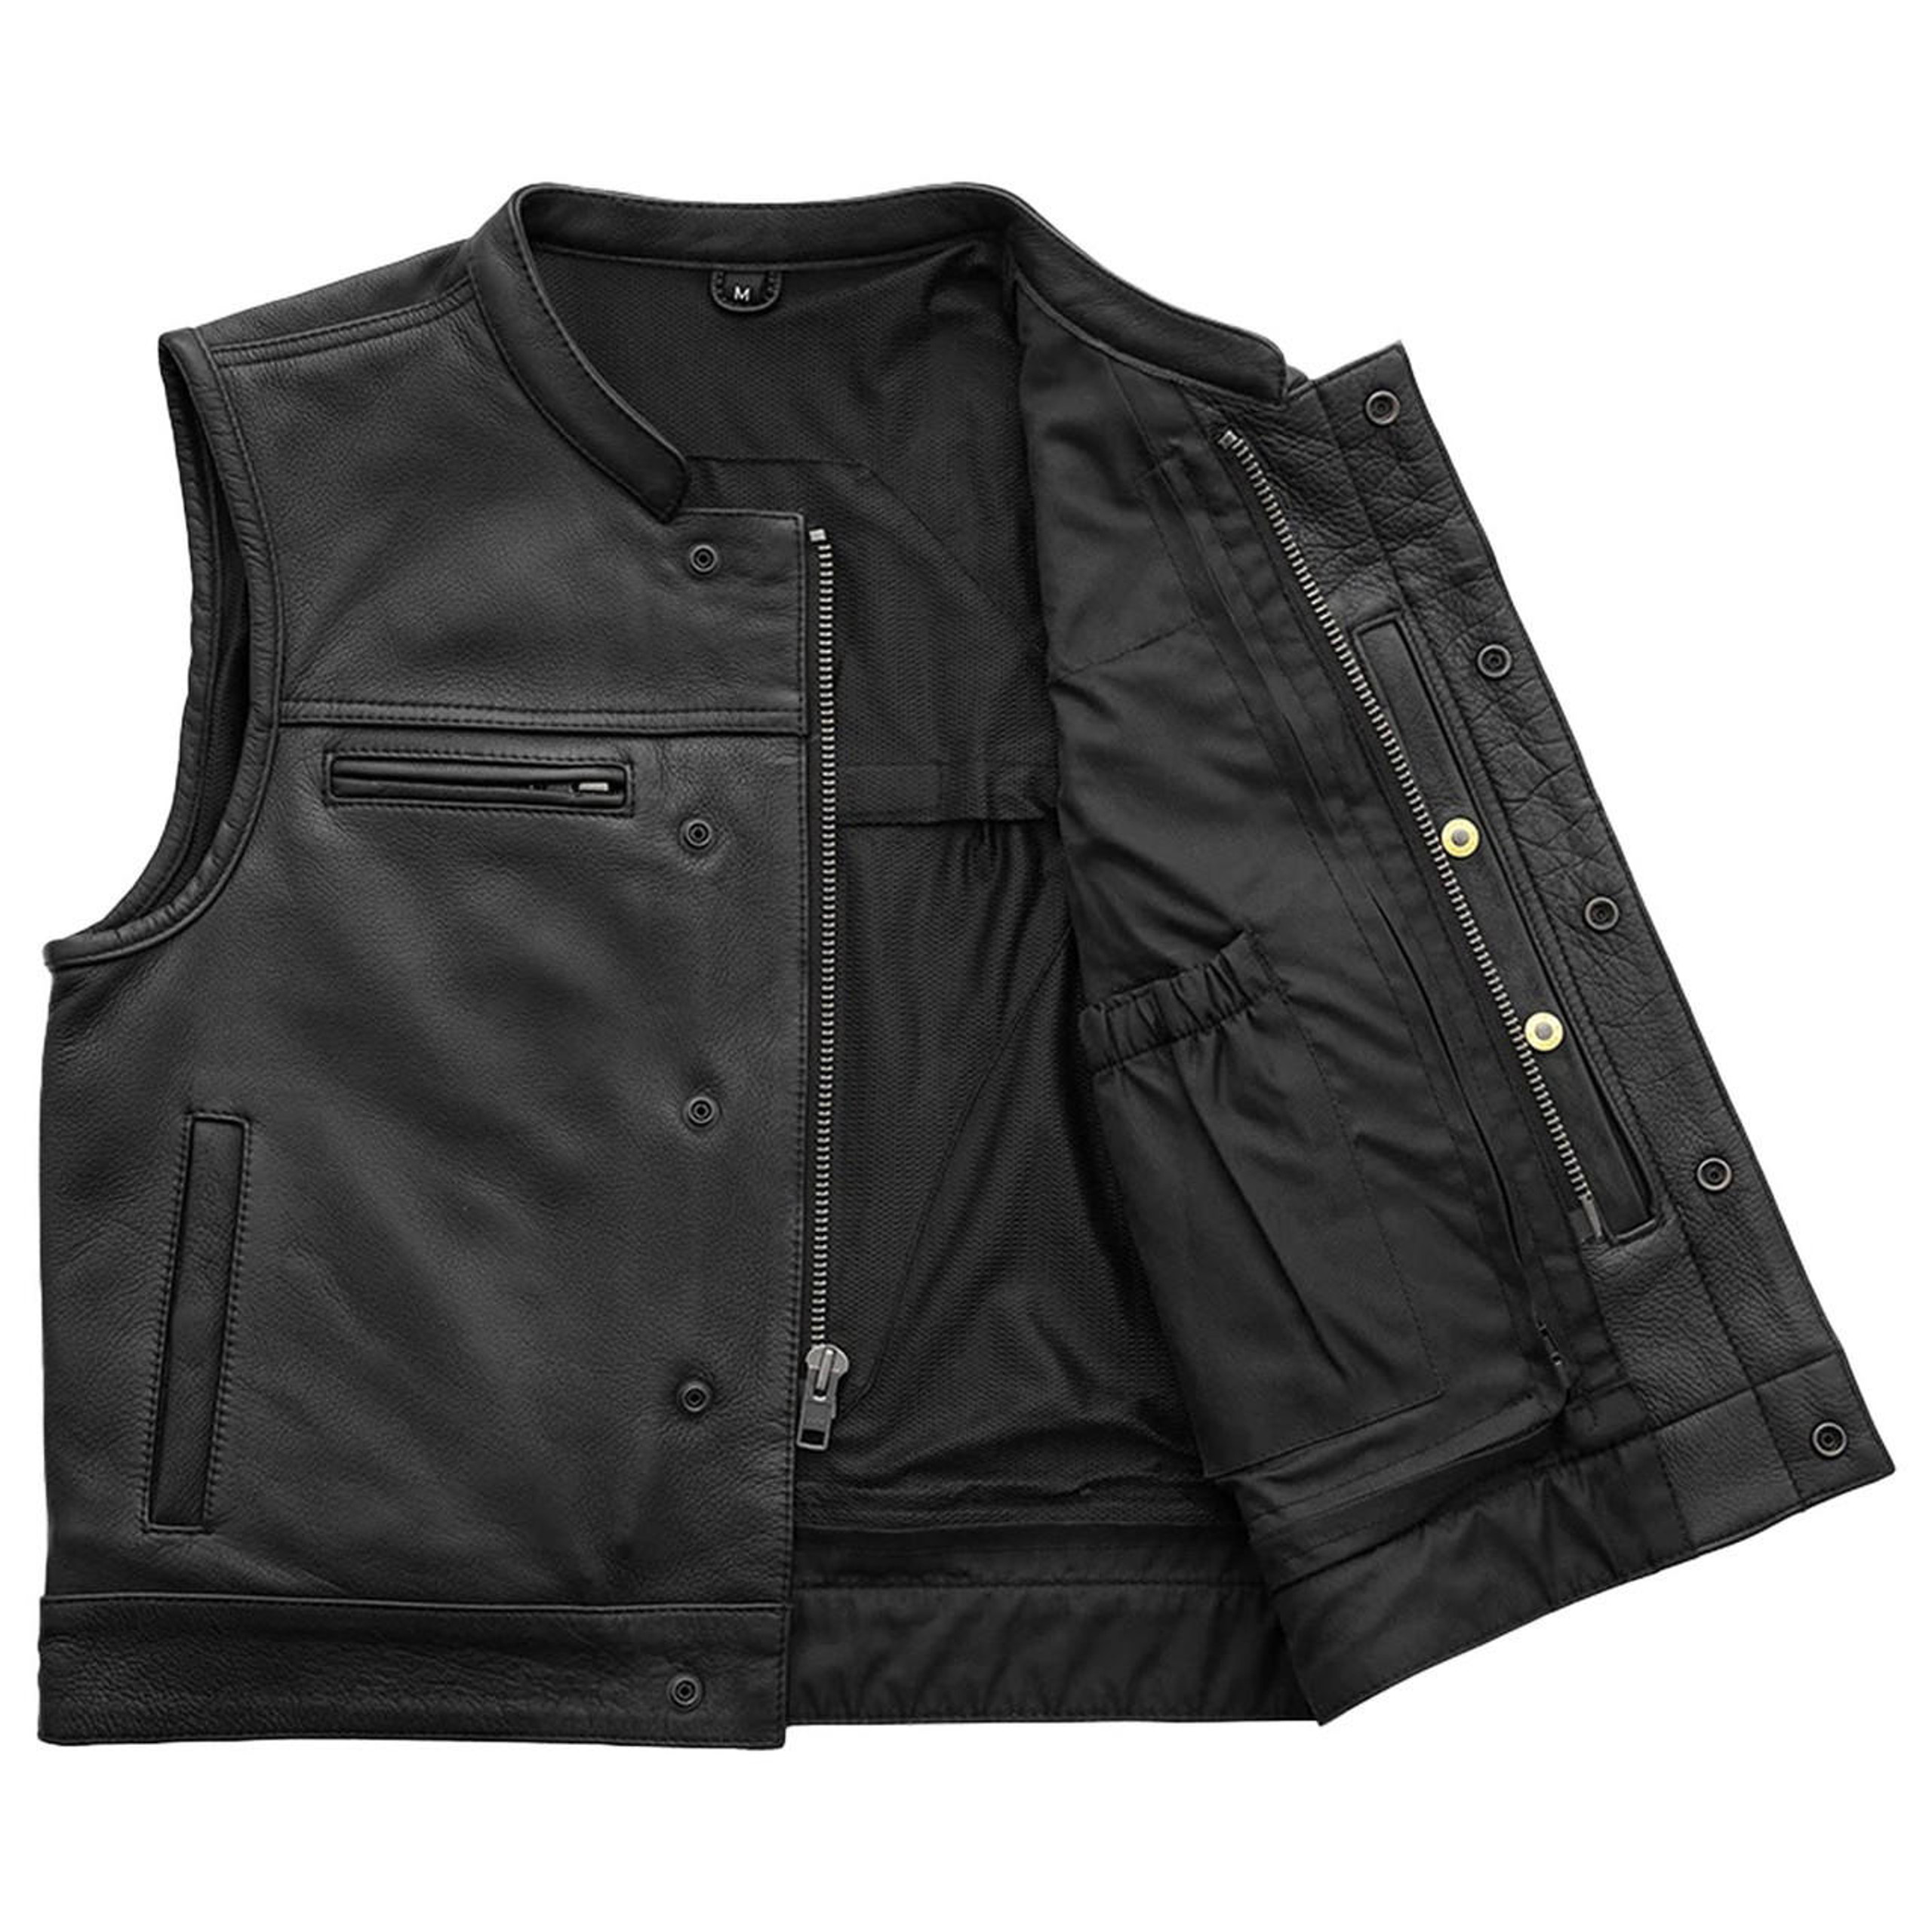 First Mfg Lowrider Motorcycle Leather Vest